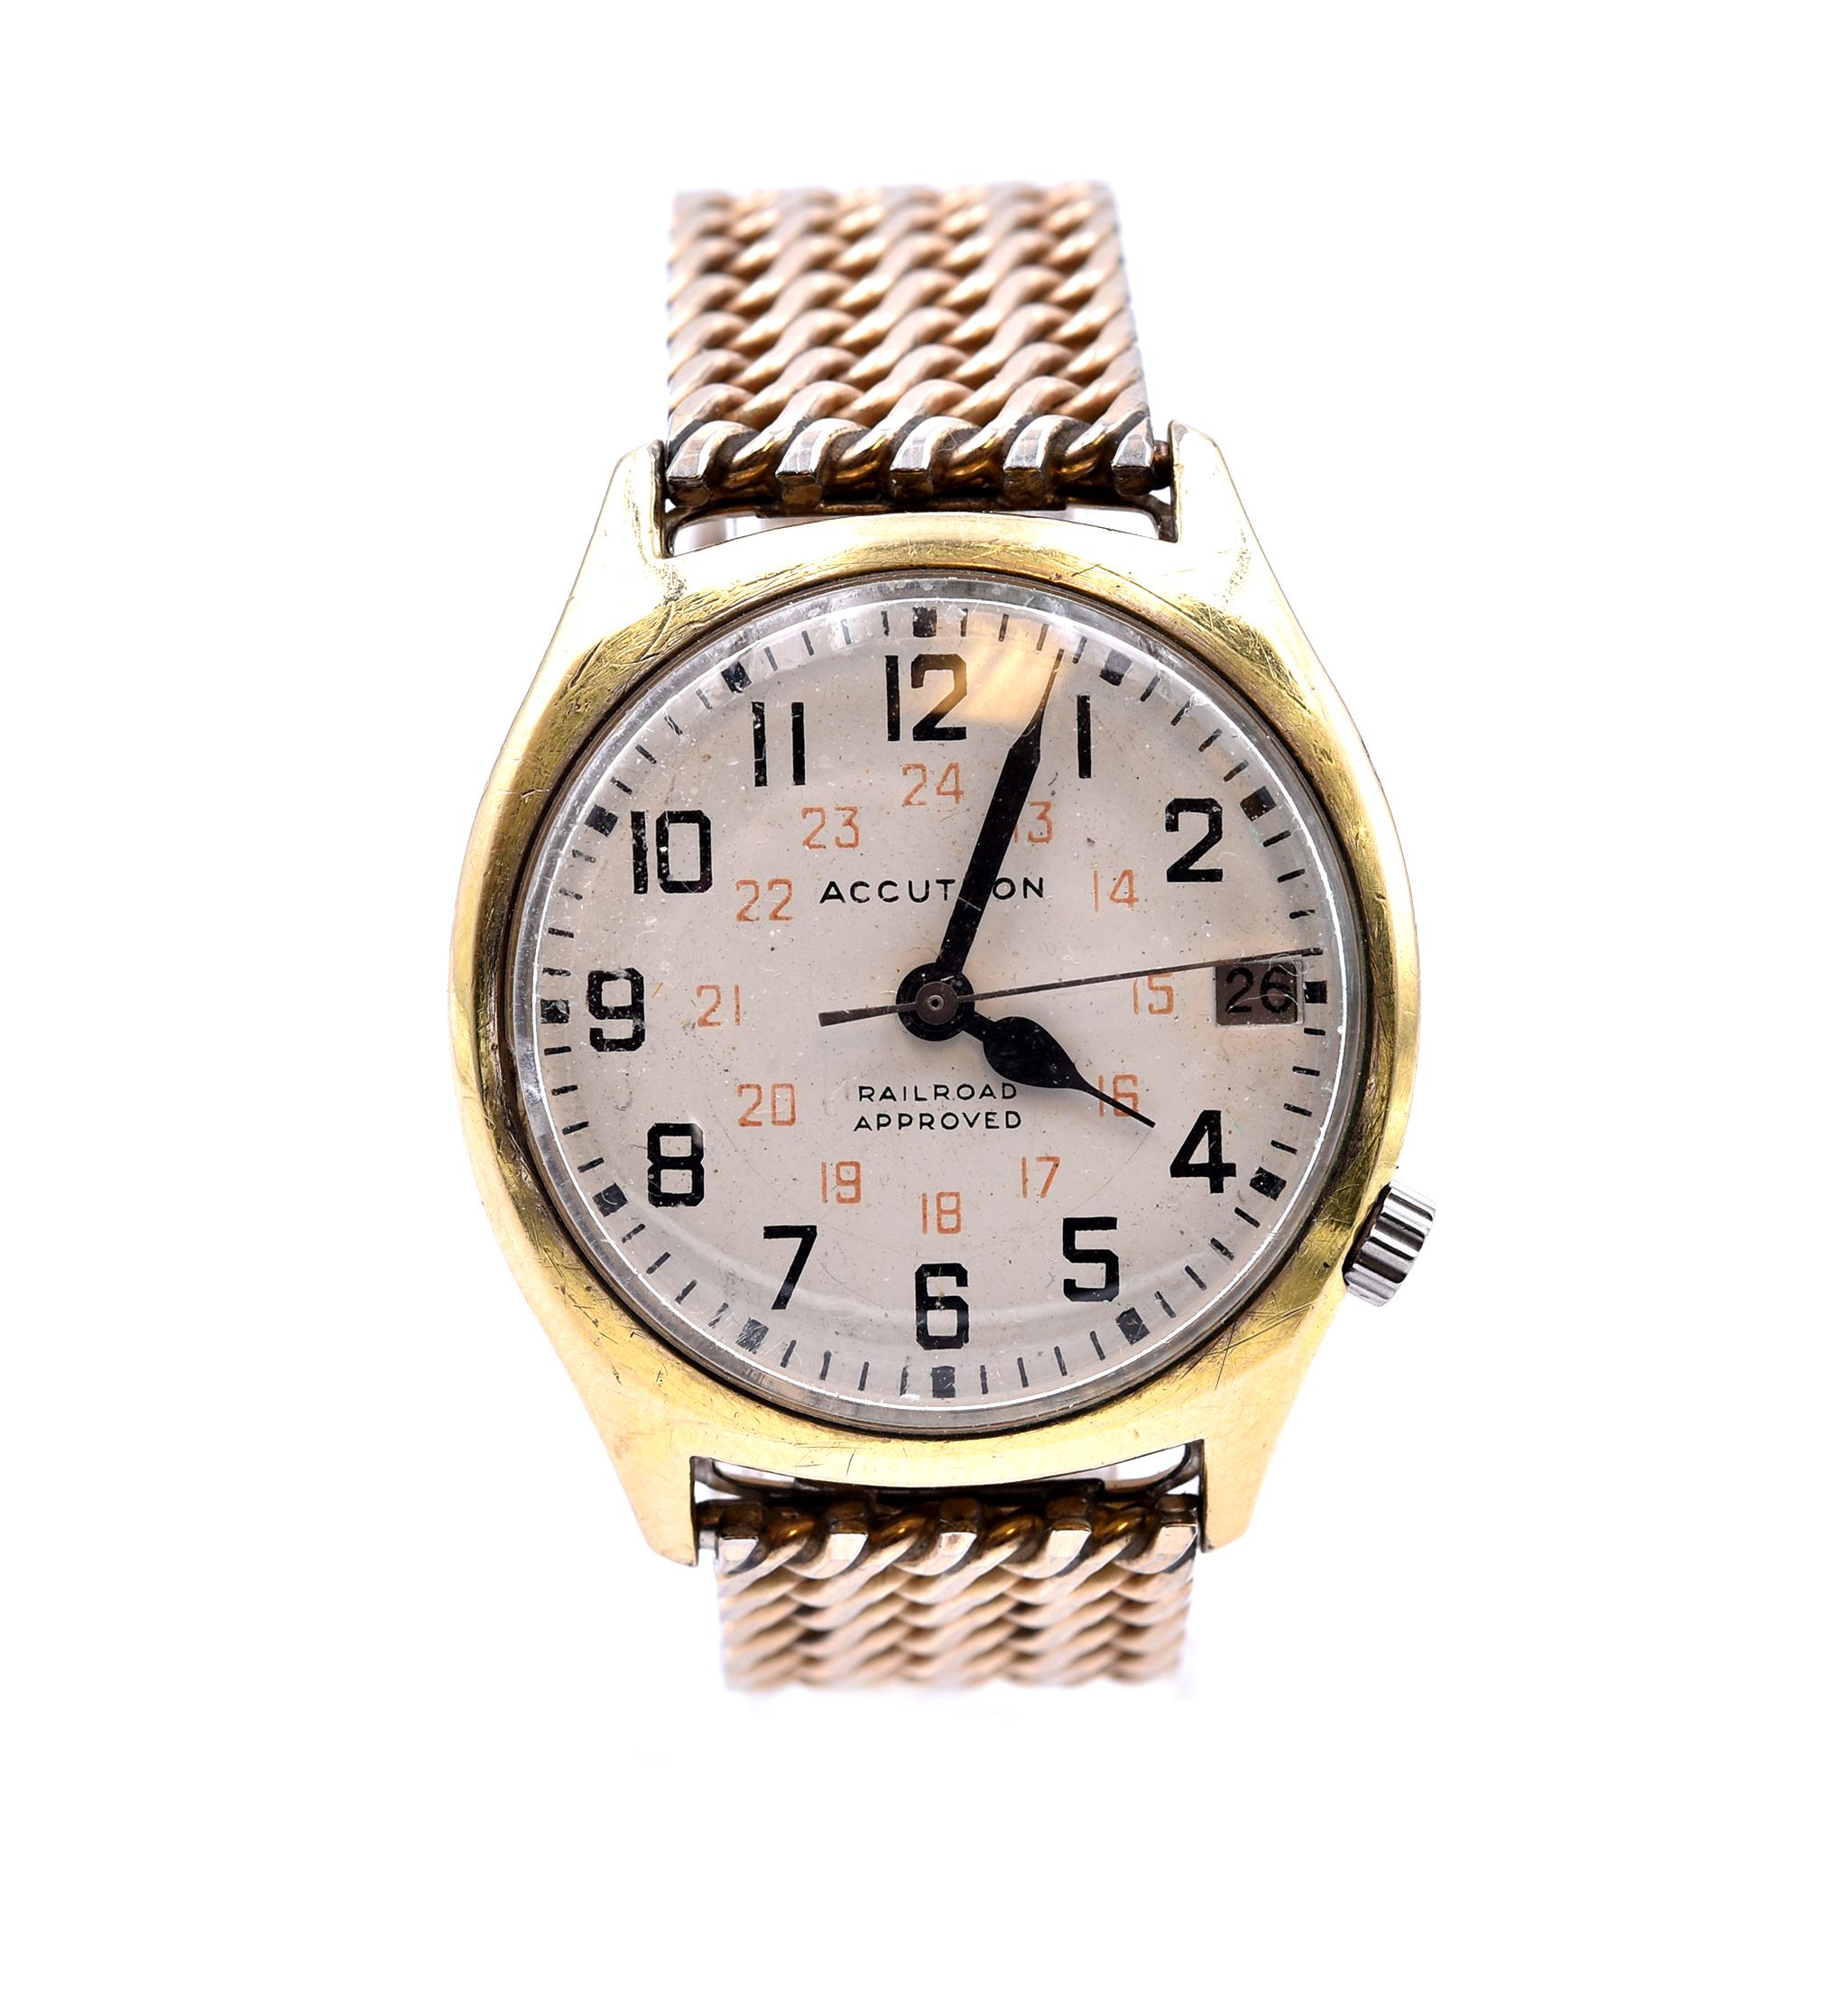 Movement: quartz  
Function: hours, minutes, seconds, date
Case: round 34mm stainless steel gold-plate case with plastic crystal, fixed steel gold-tone bezel, pull/push crown
Band: stainless steel gold-tone bracelet, bracelet is 6 ½-inch wrist
Dial: